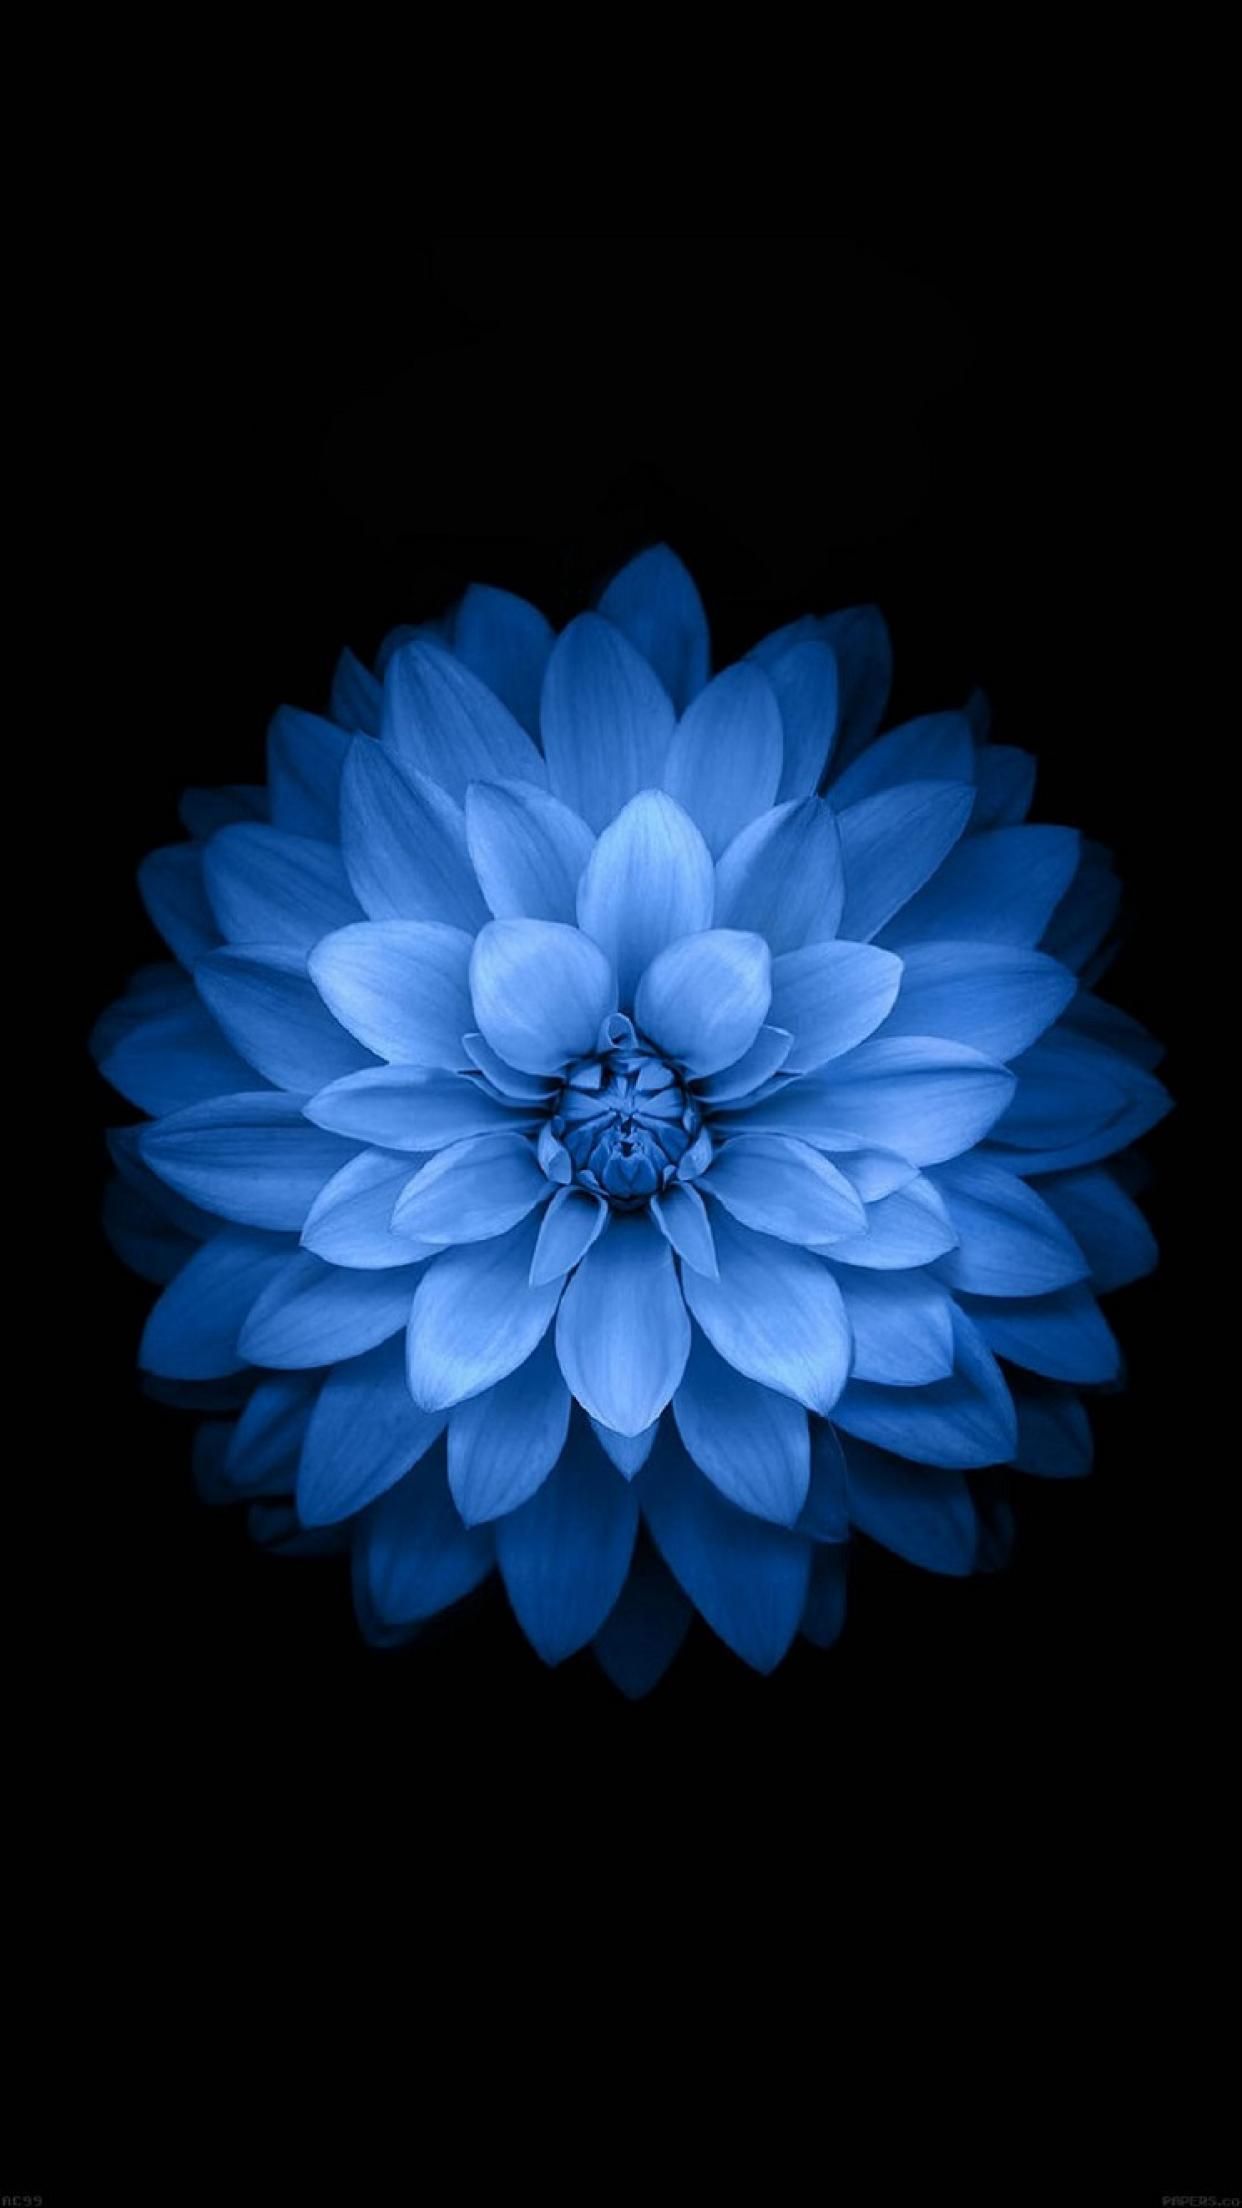 Black and Blue Flower iPhone Wallpaper Free Black and Blue Flower iPhone Background